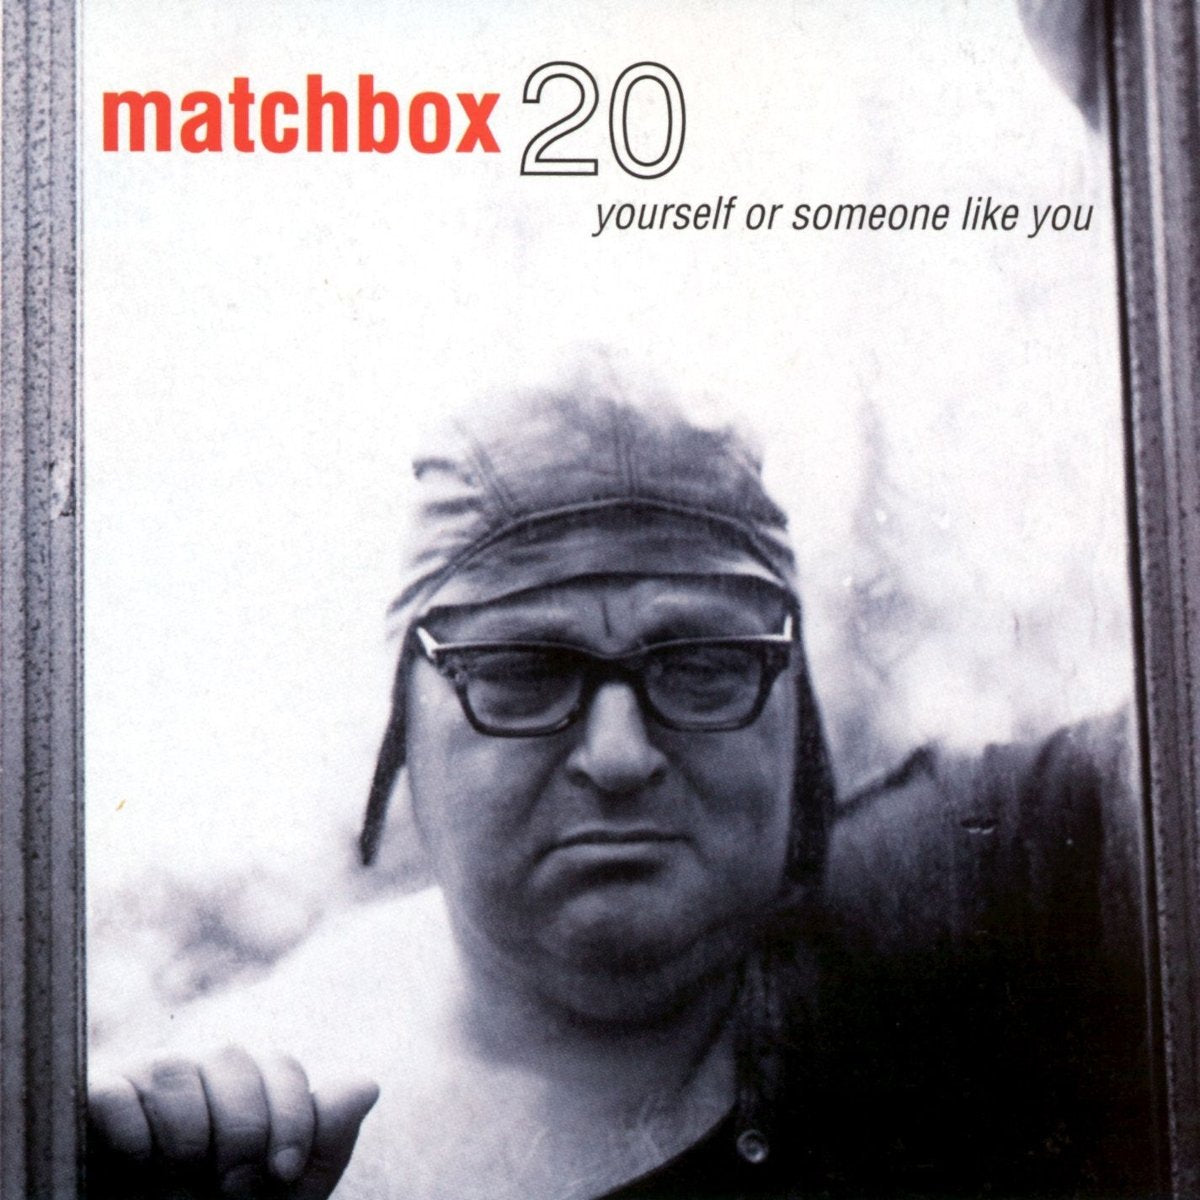 MATCHBOX 20 - YOURSELF OR SOMEONE LIKE YOU Vinyl LP